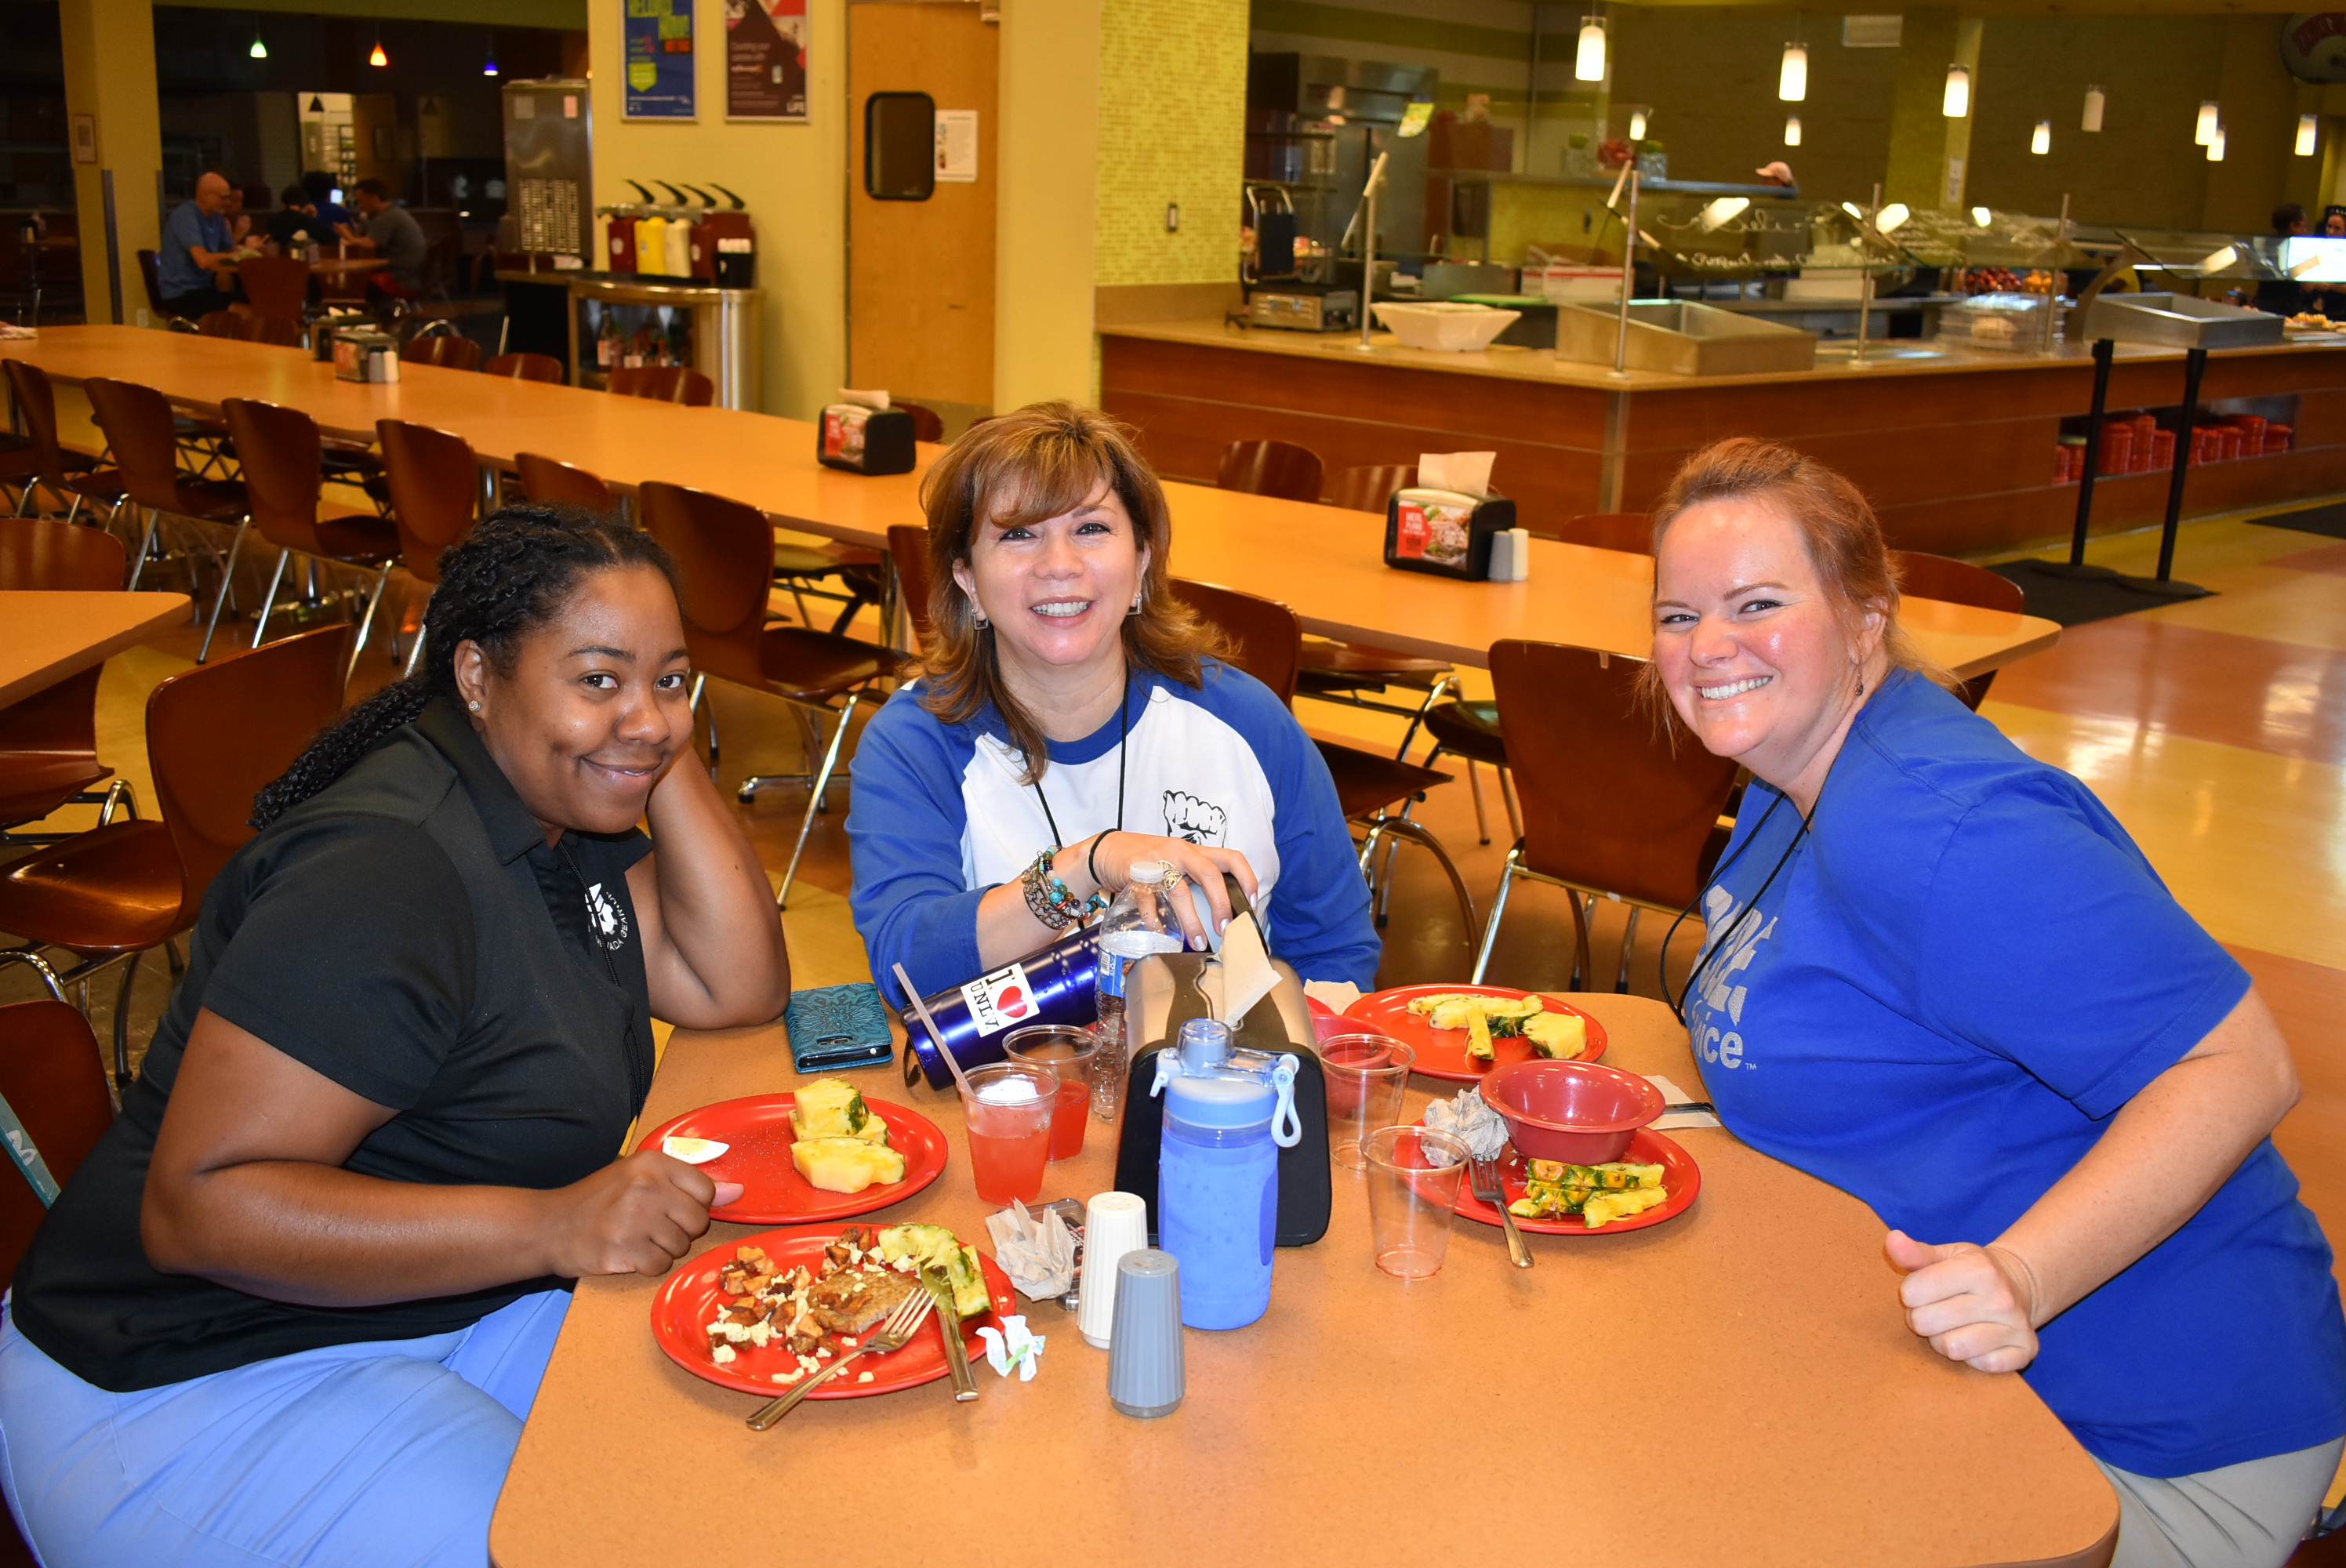 A group of three women sitting in a mostly empty cafeteria smile for the camera.